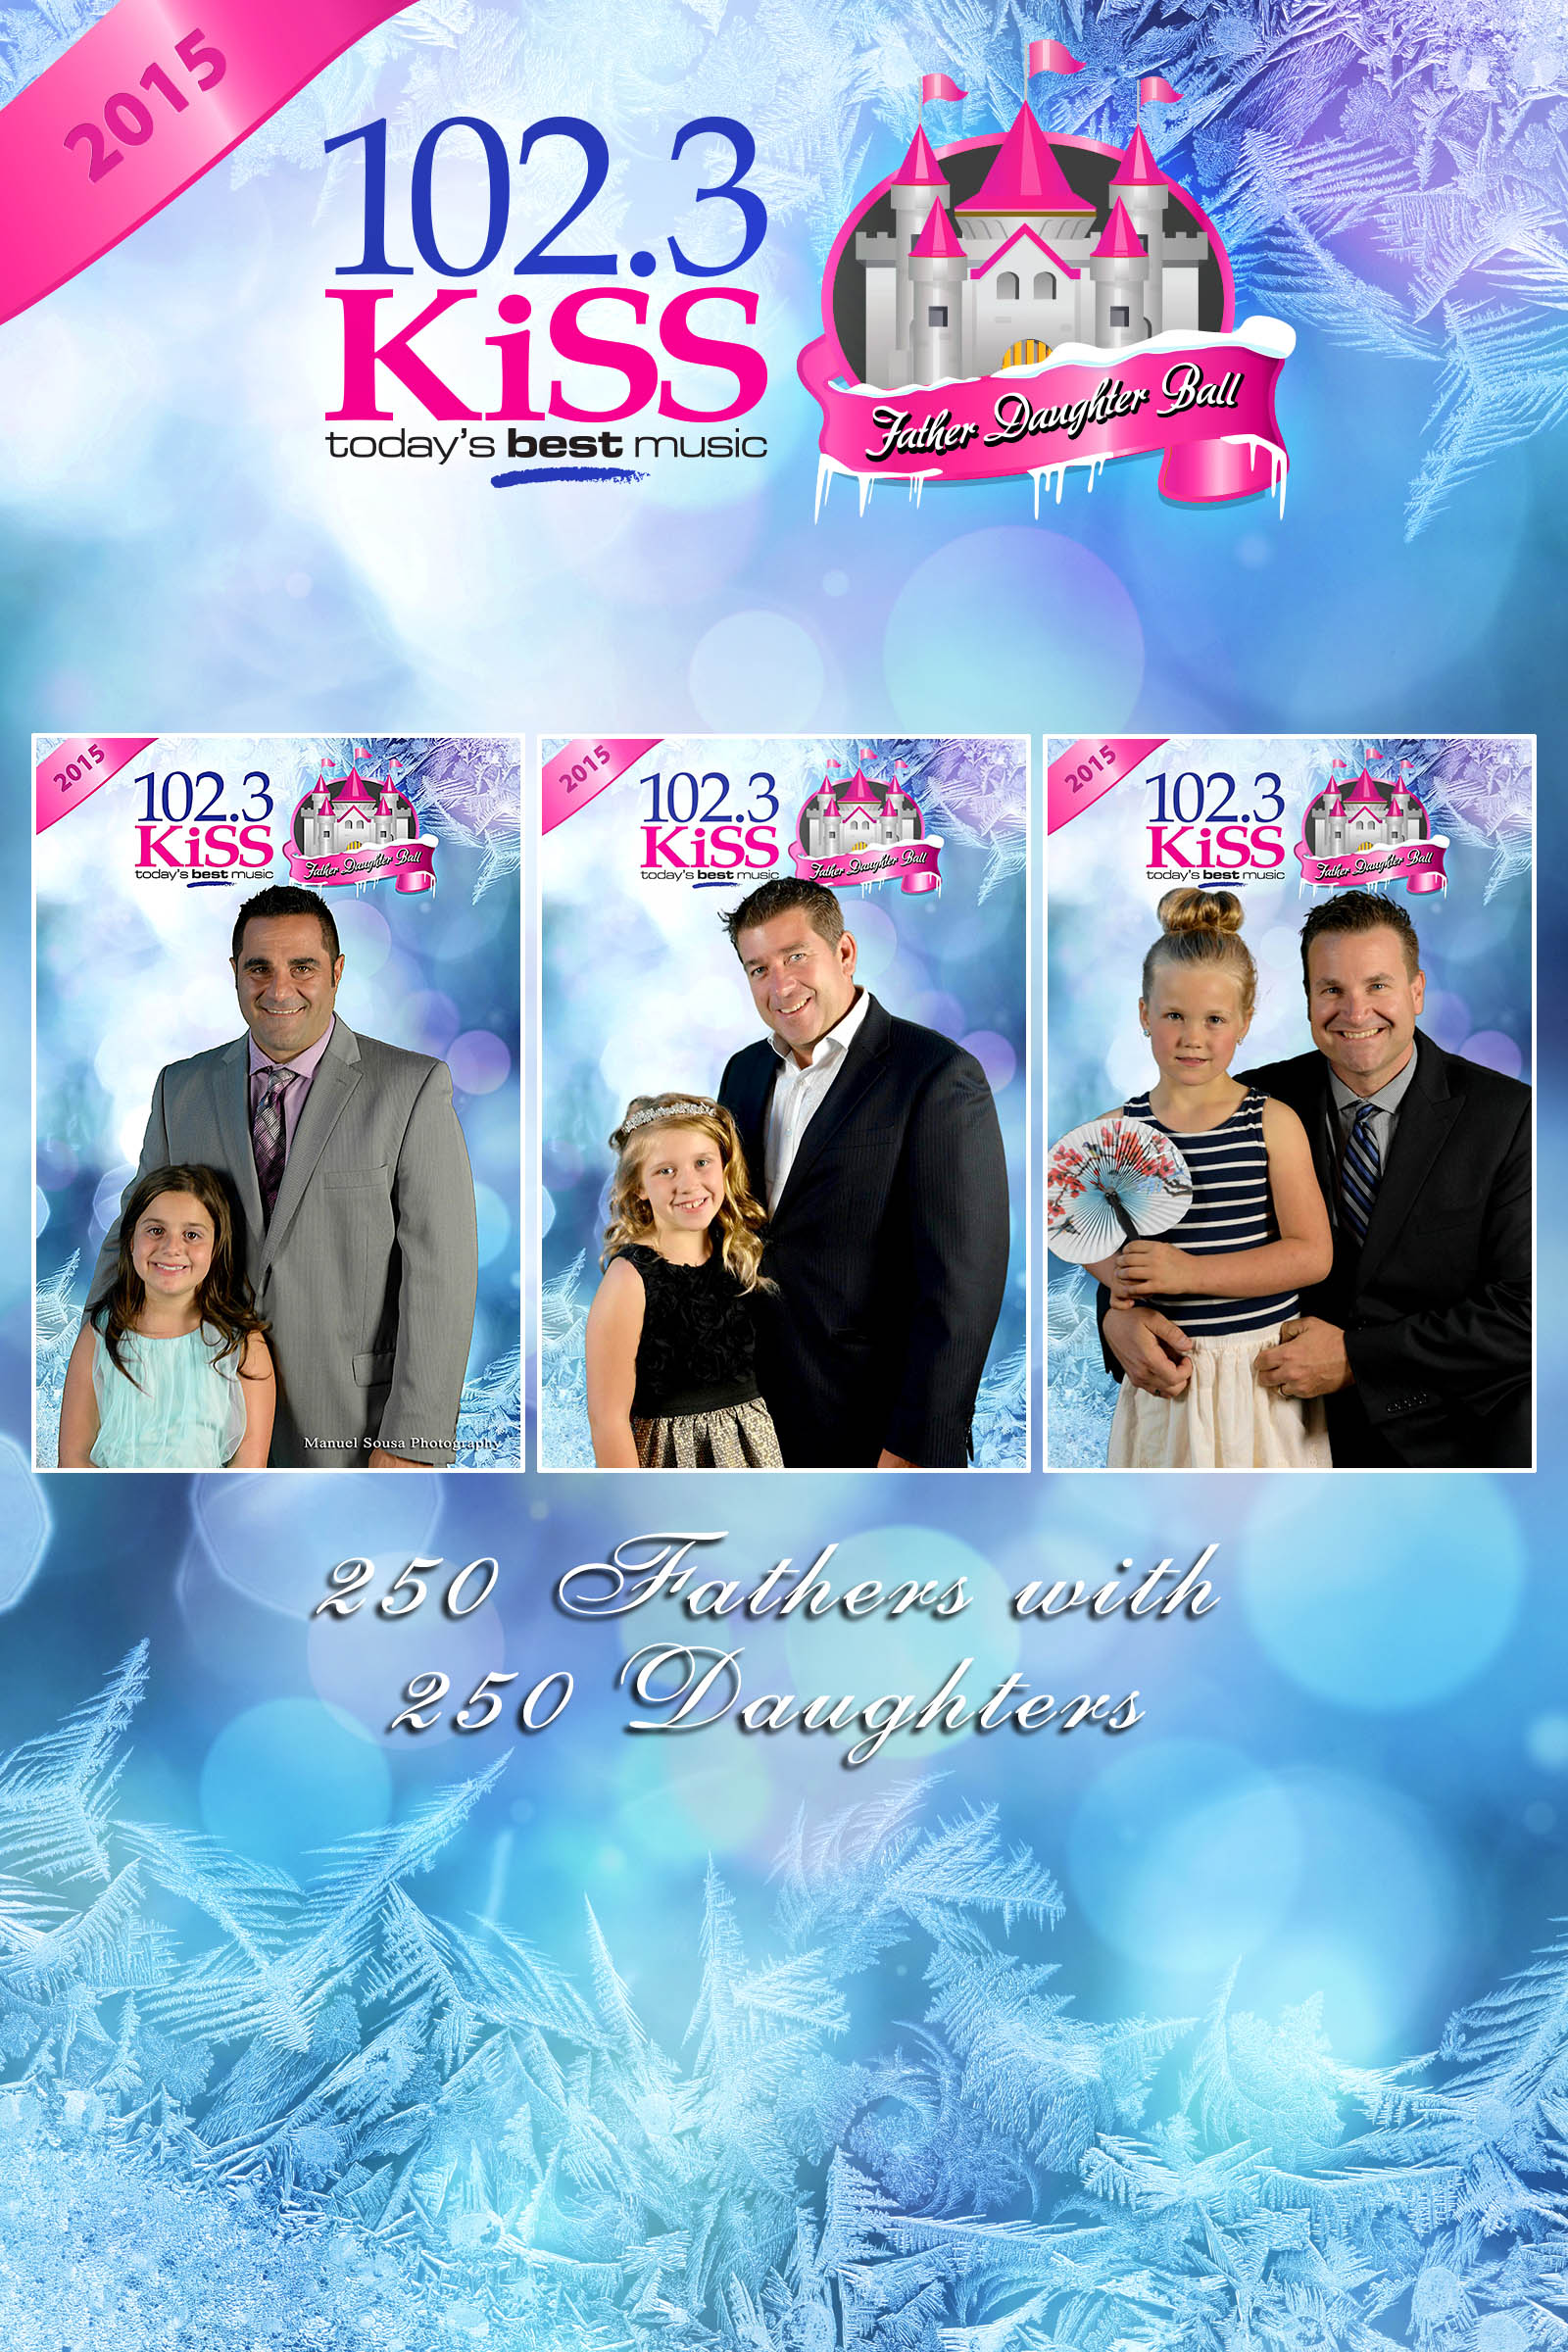 KISS 102.3 Father Daughter Ball